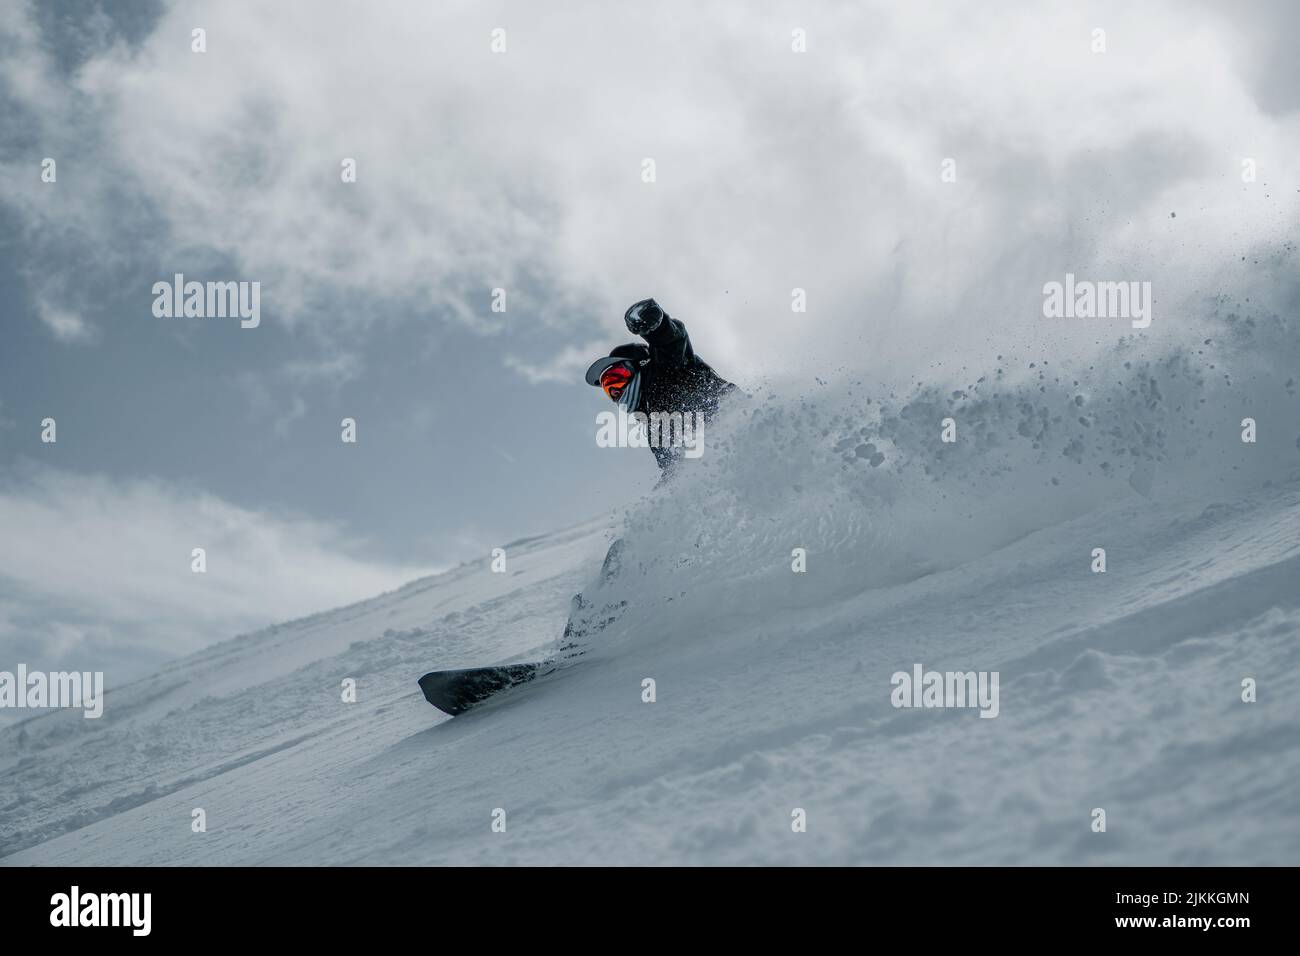 A Snowboarder moves down the ski slope Stock Photo